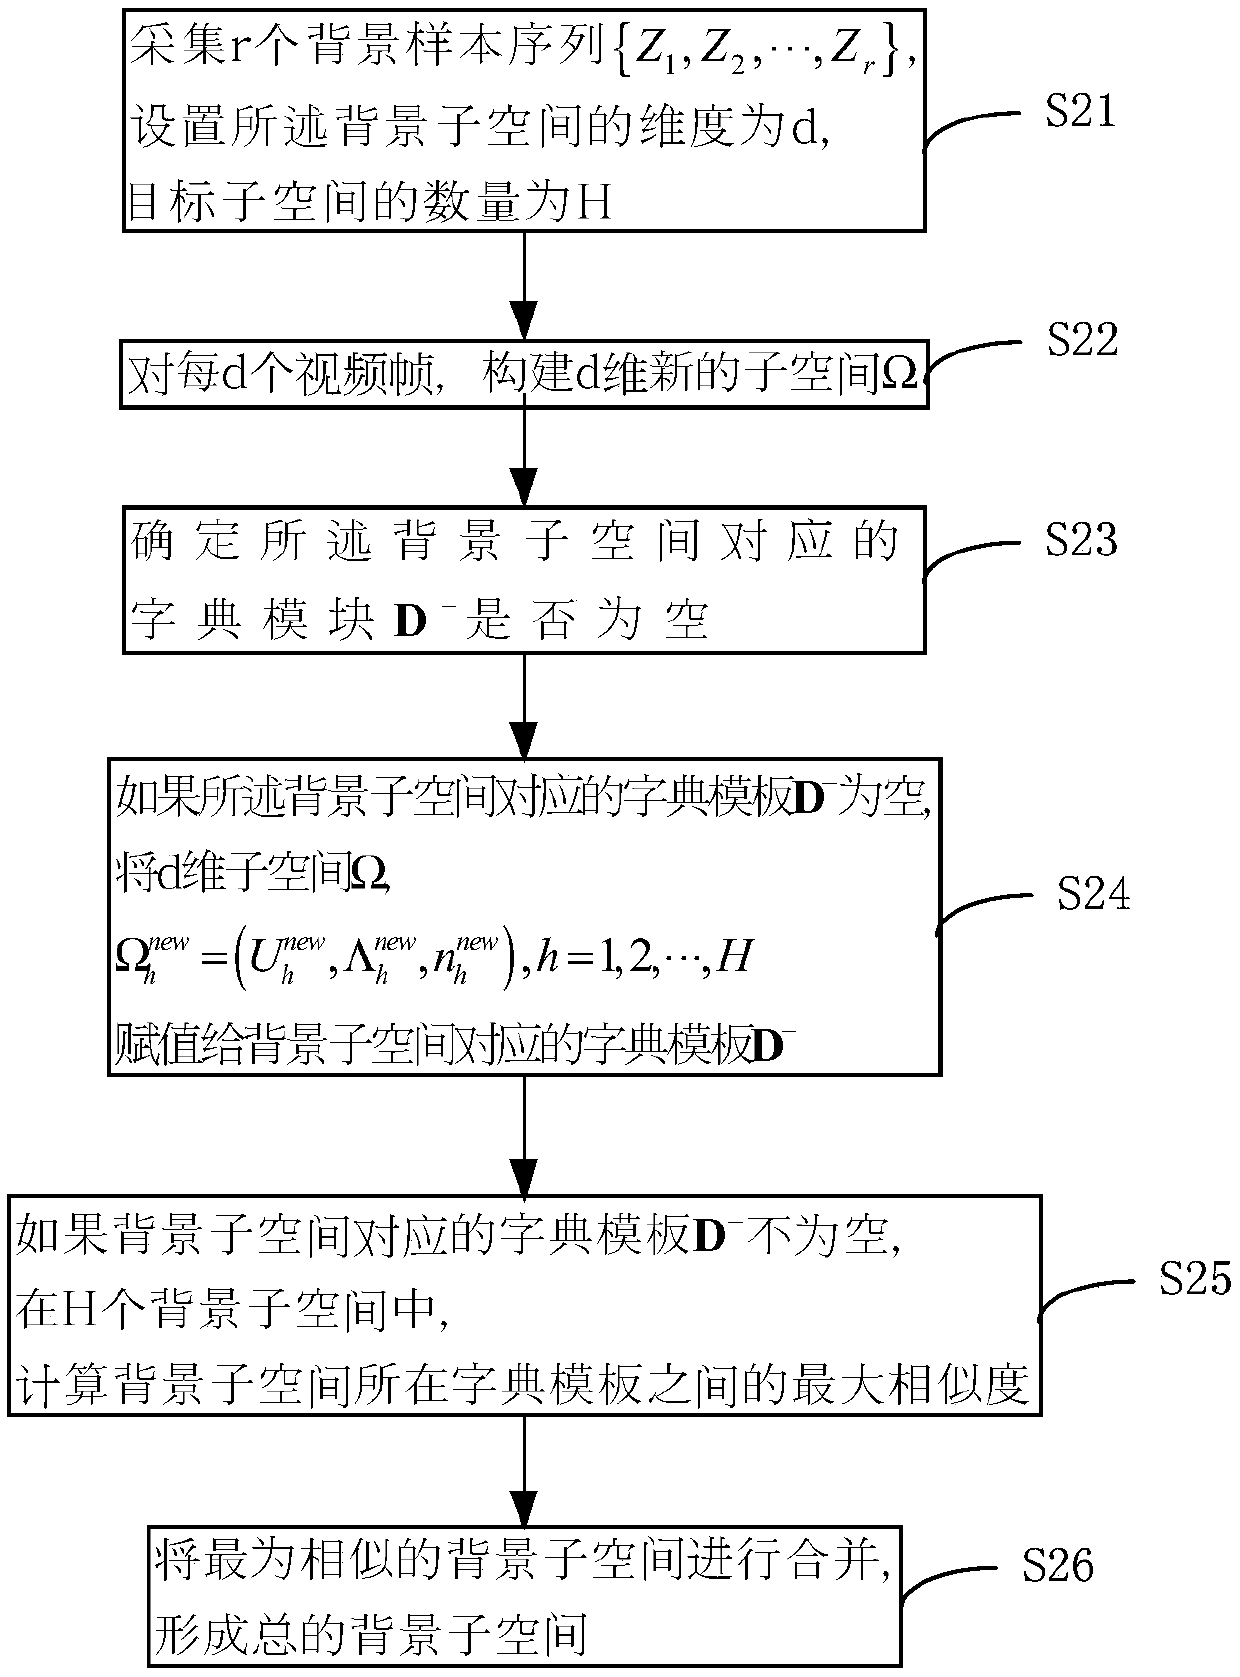 Target tracking method and device